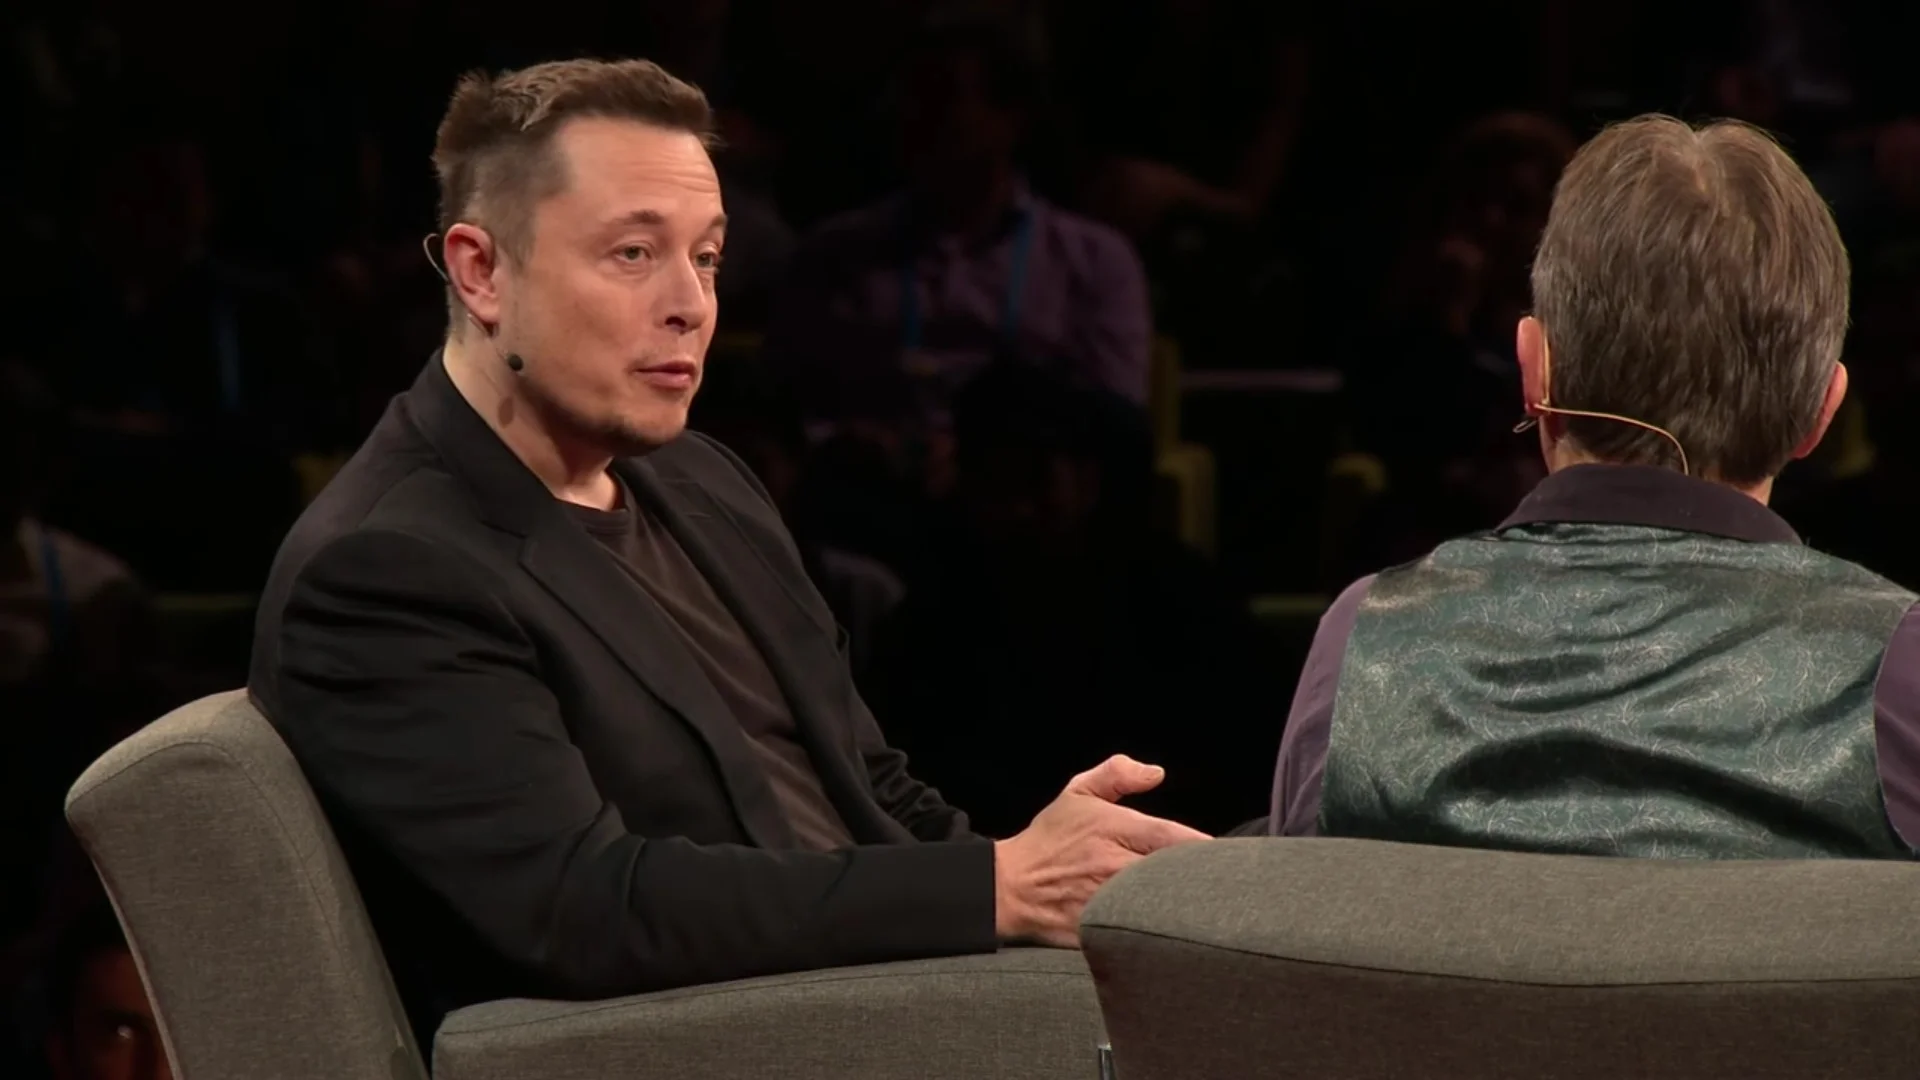 Elon Musk at TED Talks. Photo by: TED Talks / YouTube